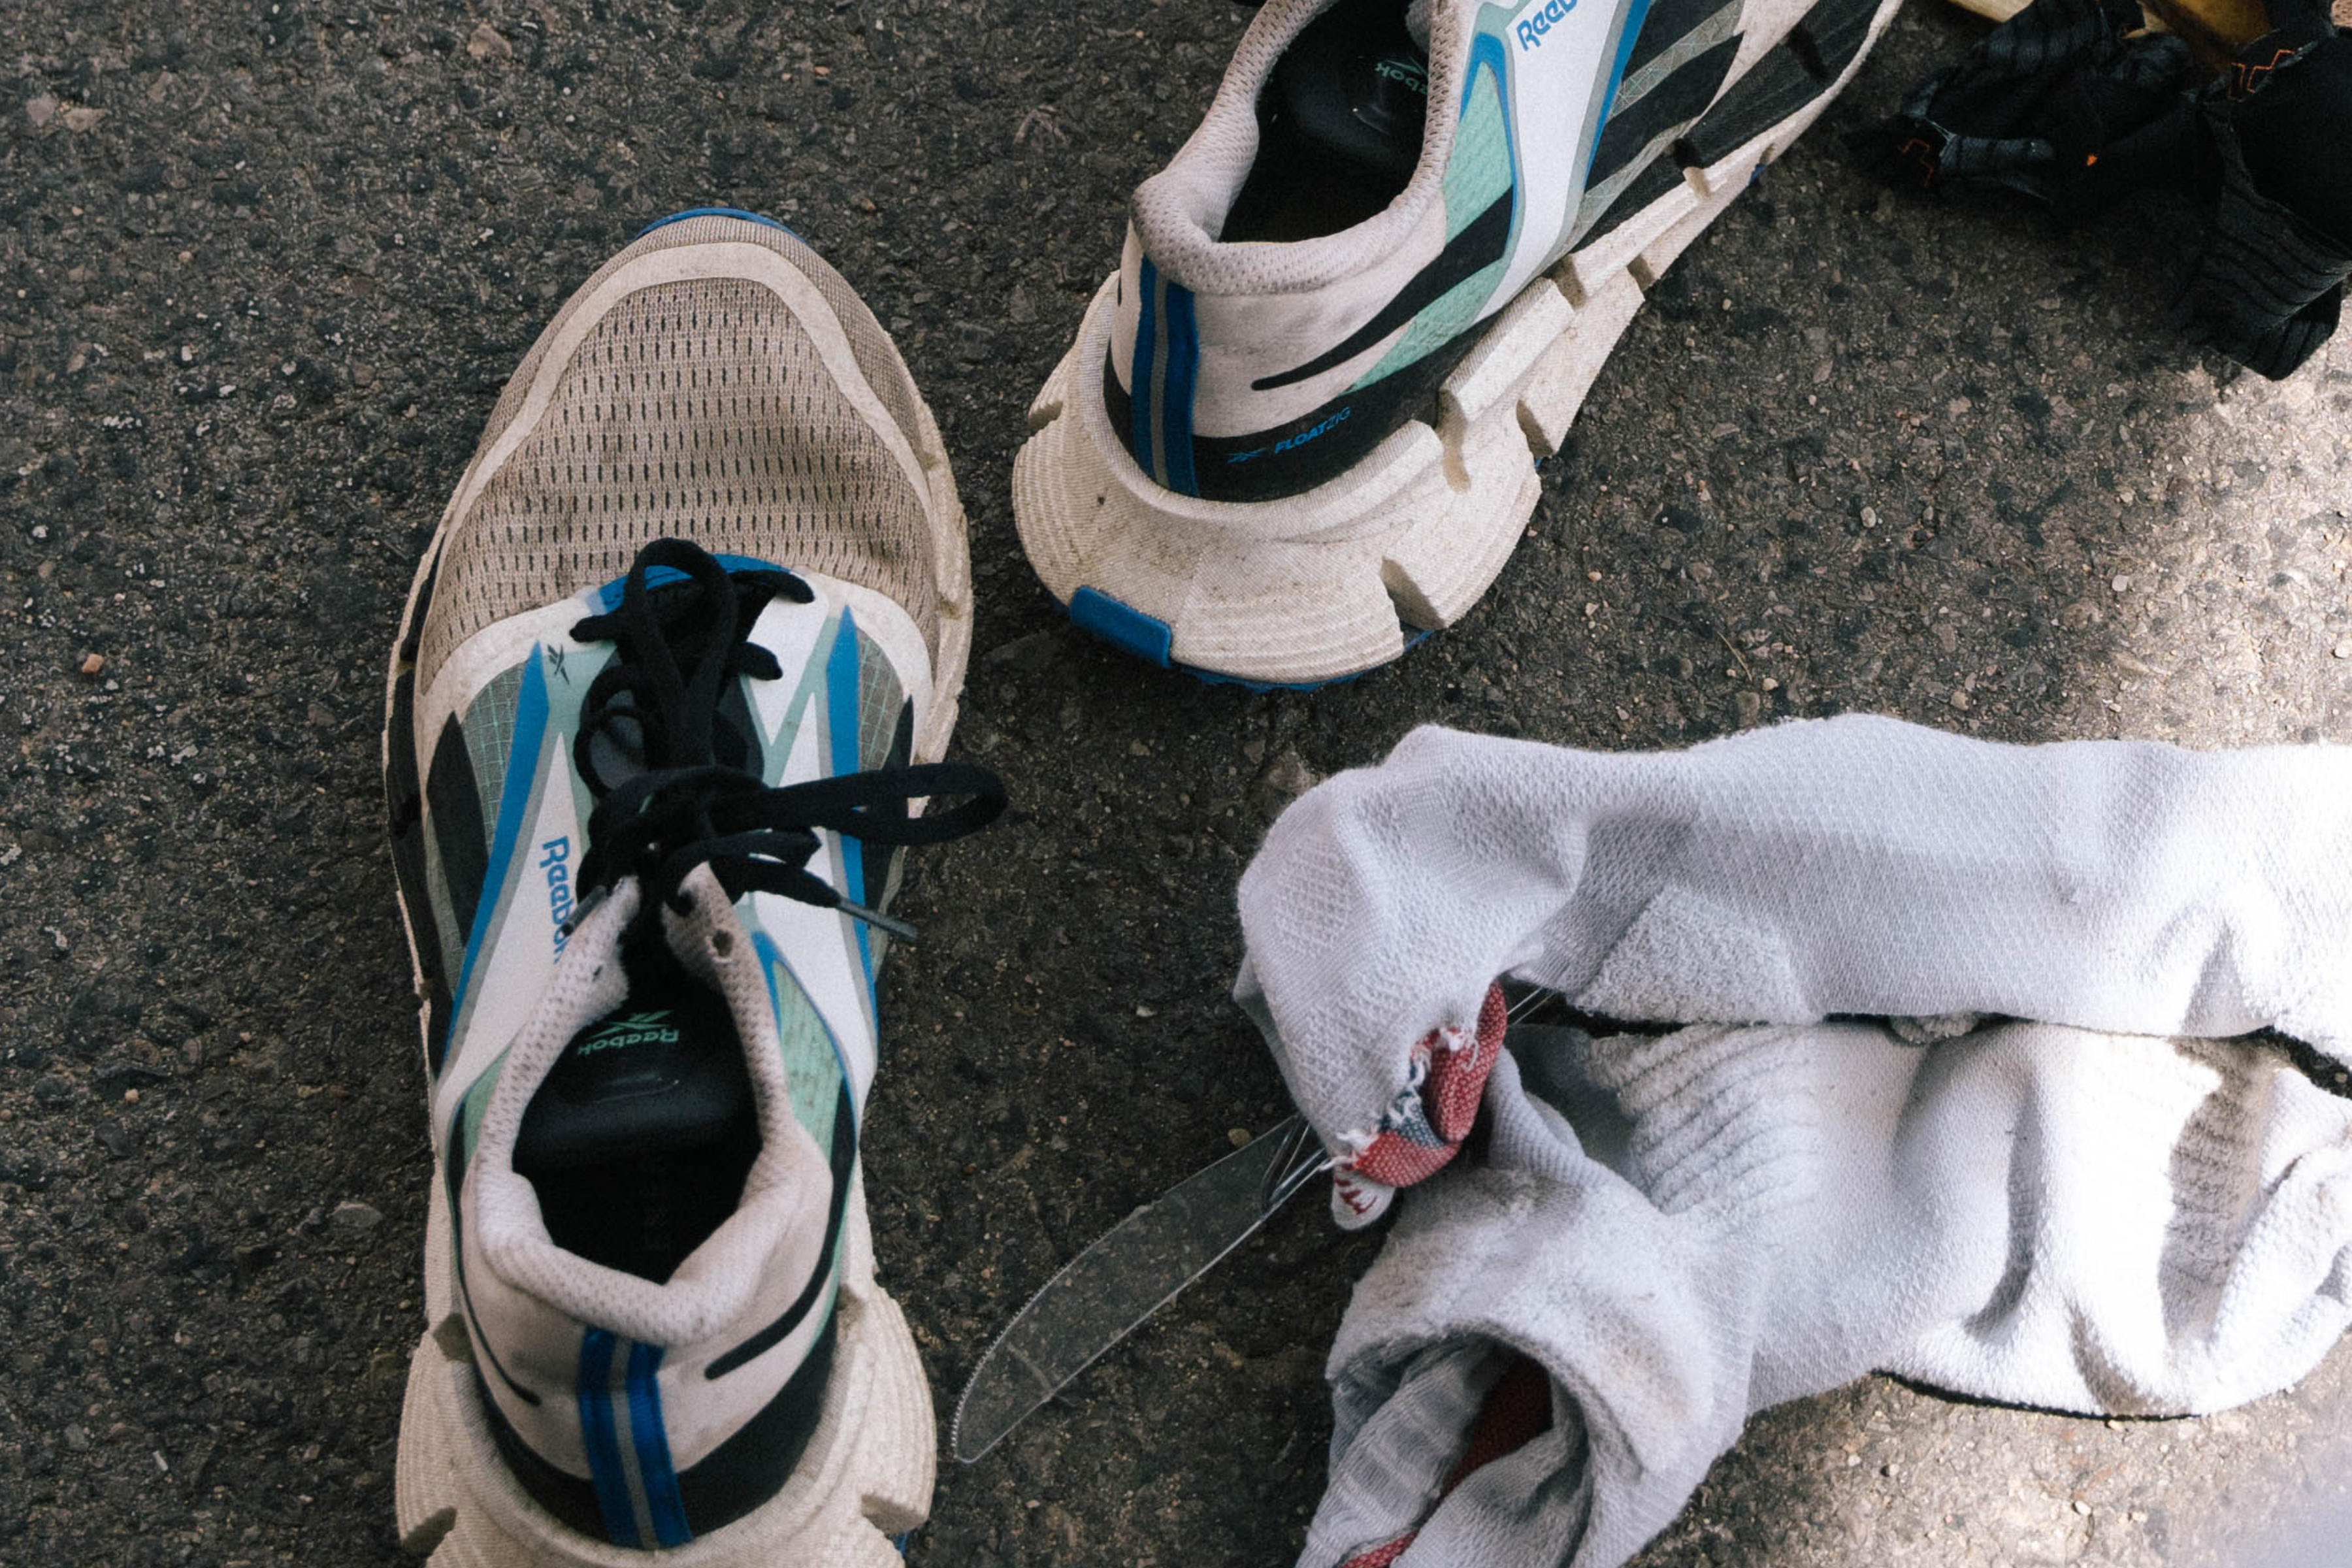 Close-up of used, dirty running shoes and tools